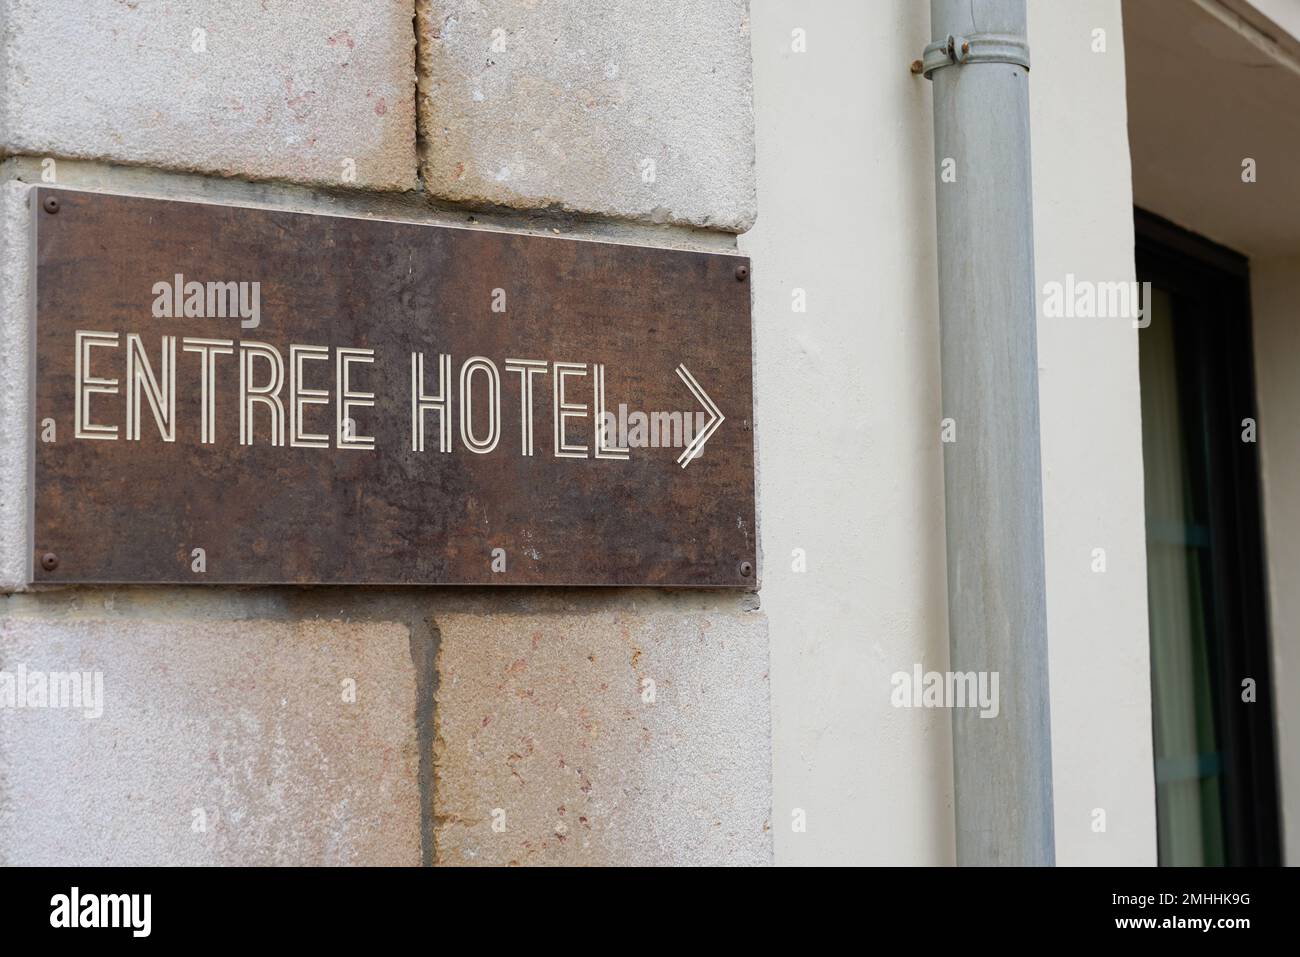 entree hotel means in french entrance to hotel sign text on old panel in tourist city Stock Photo